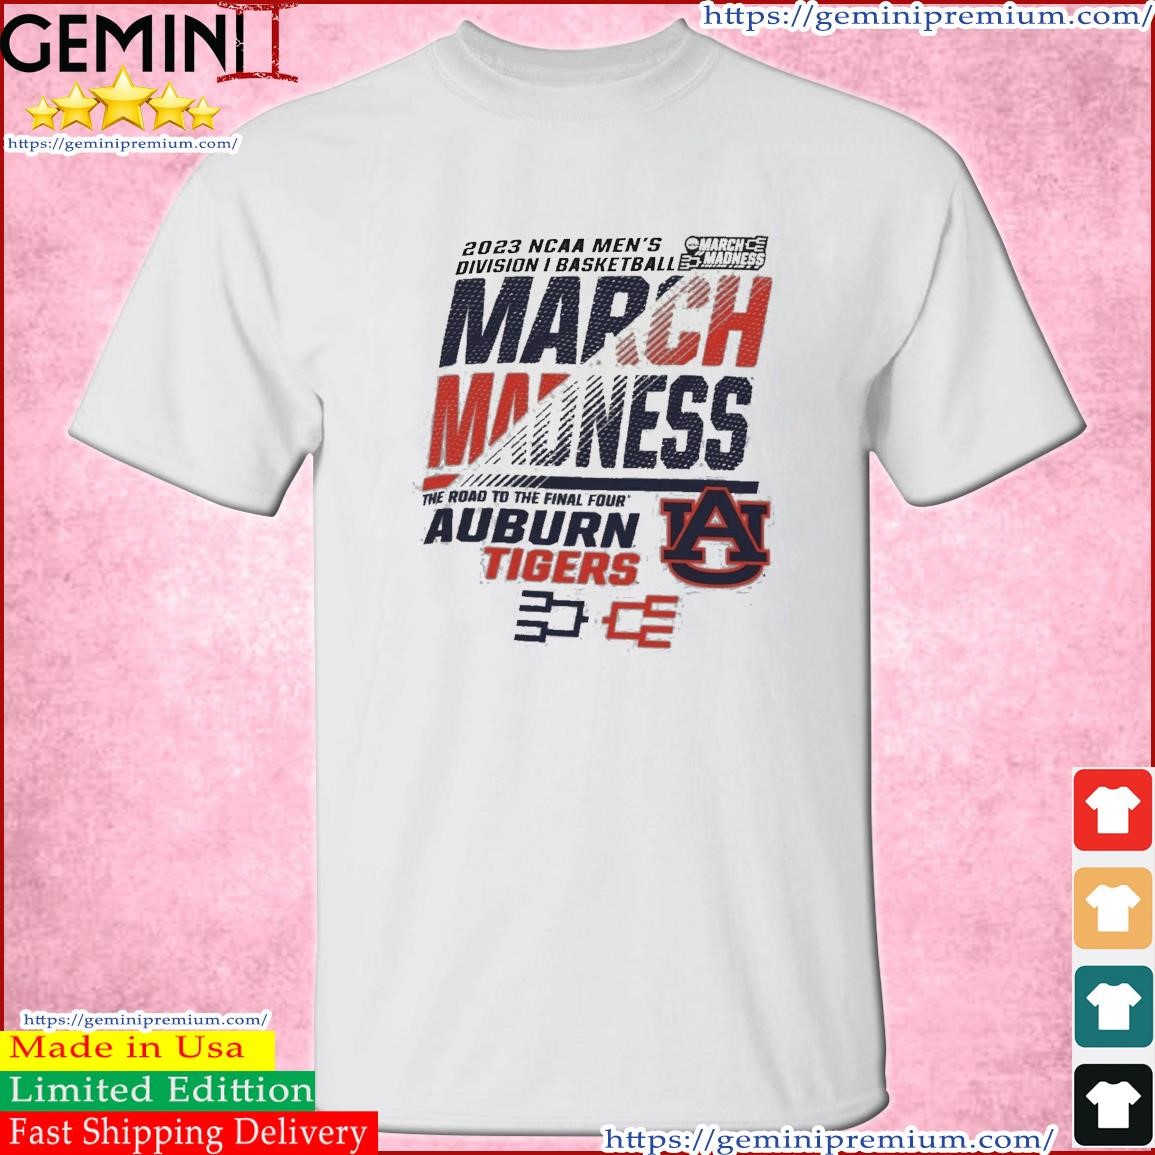 Auburn Tigers Men's Basketball 2023 NCAA March Madness The Road To Final Four Shirt